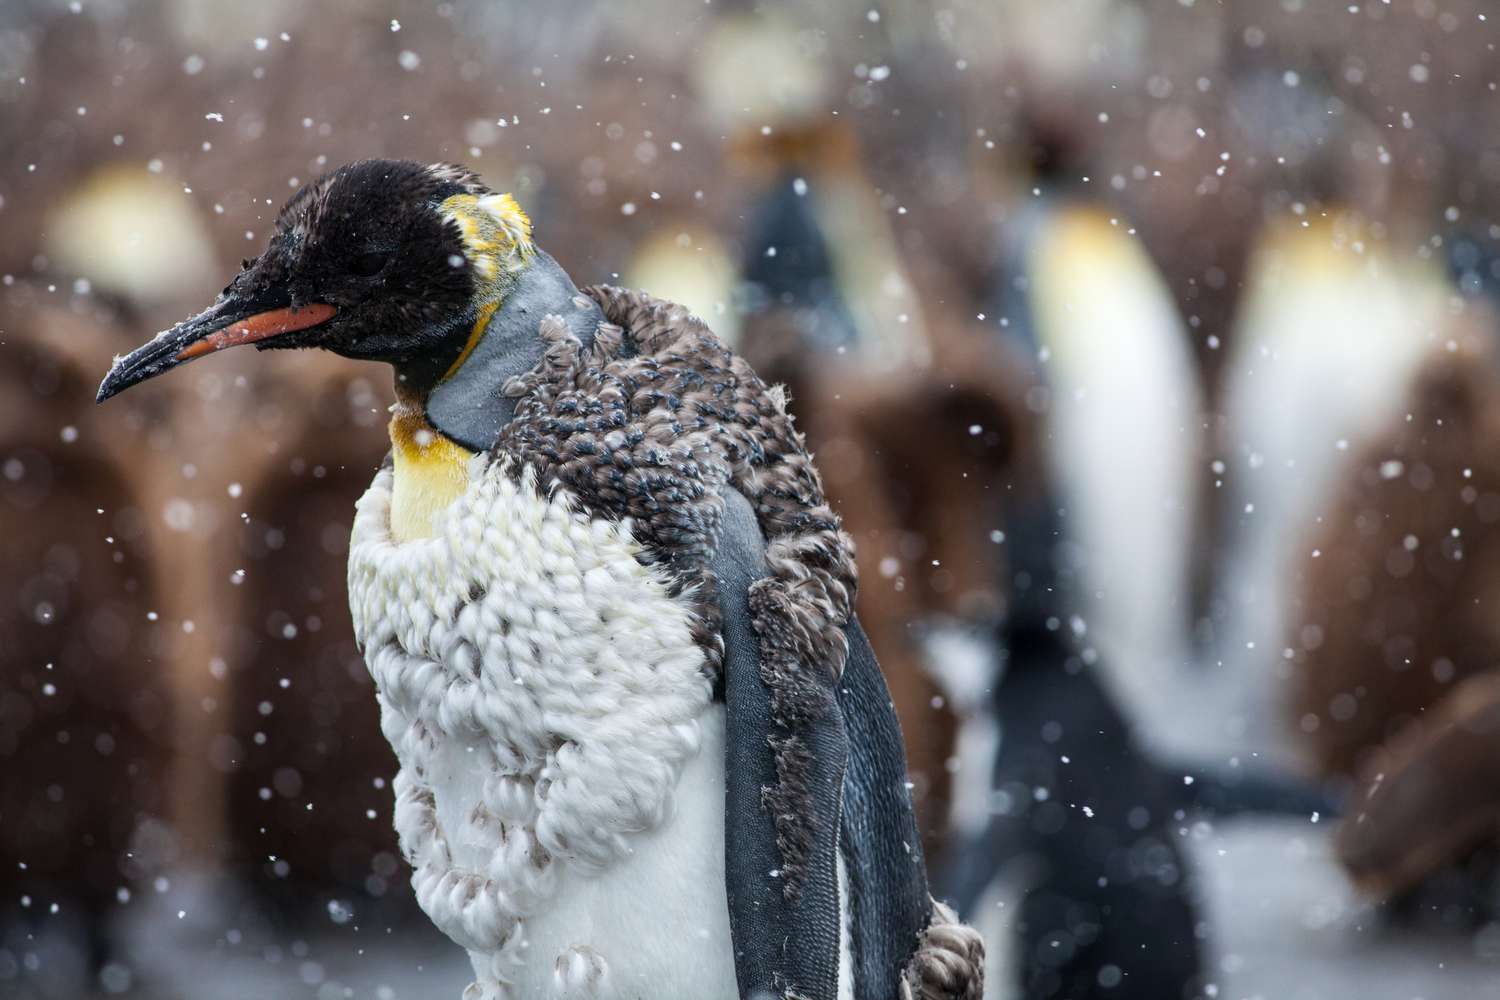 Moulting or molting King Penguin